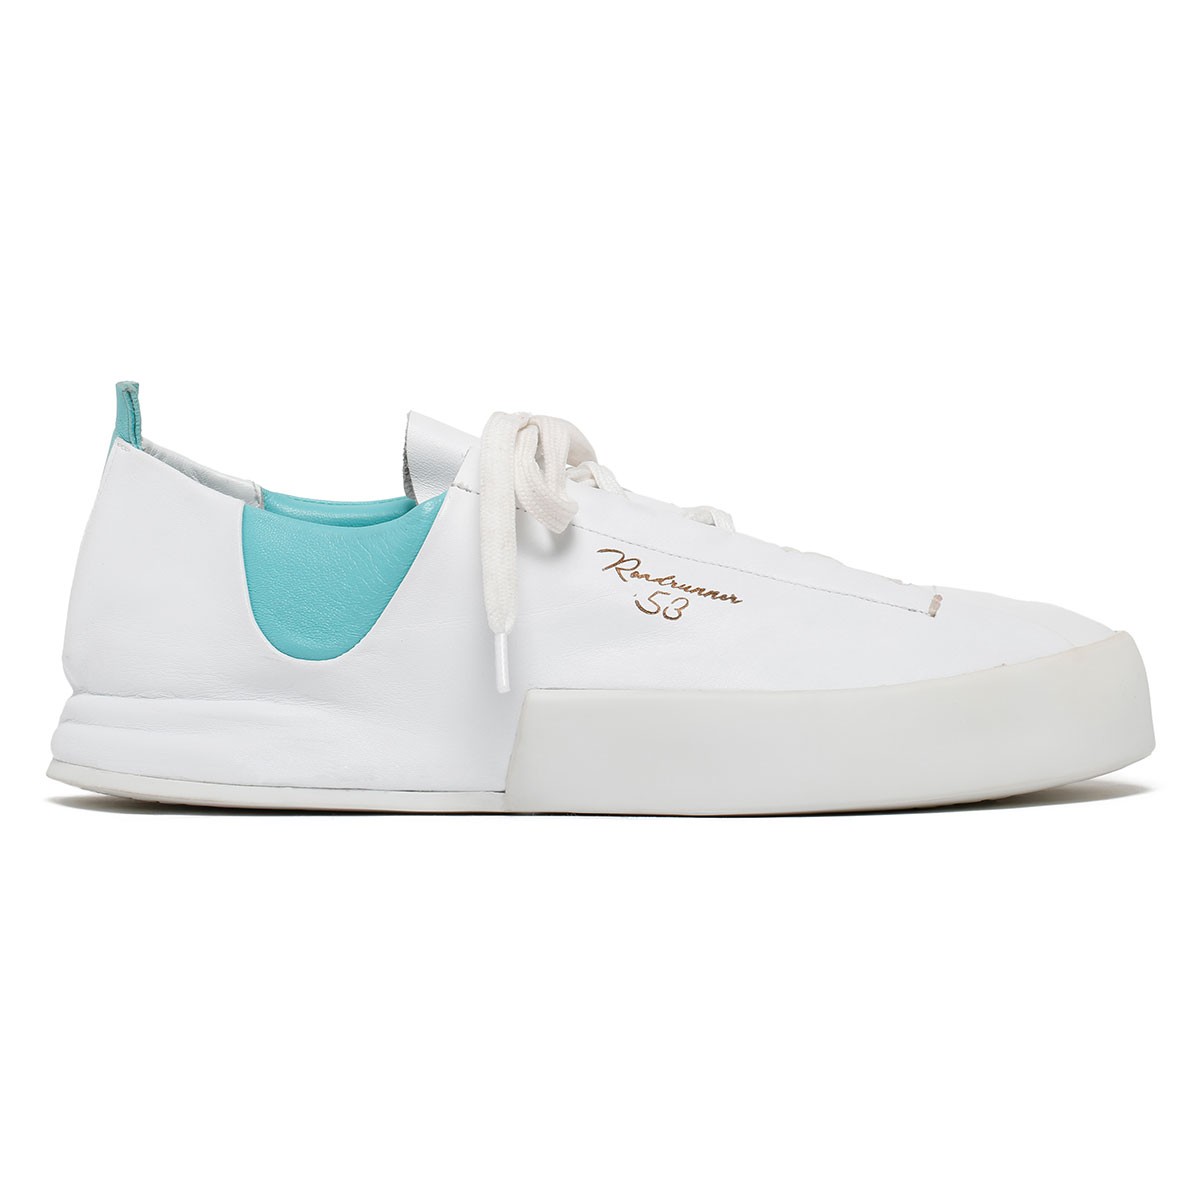 Jegher white and aquamarine sneakers